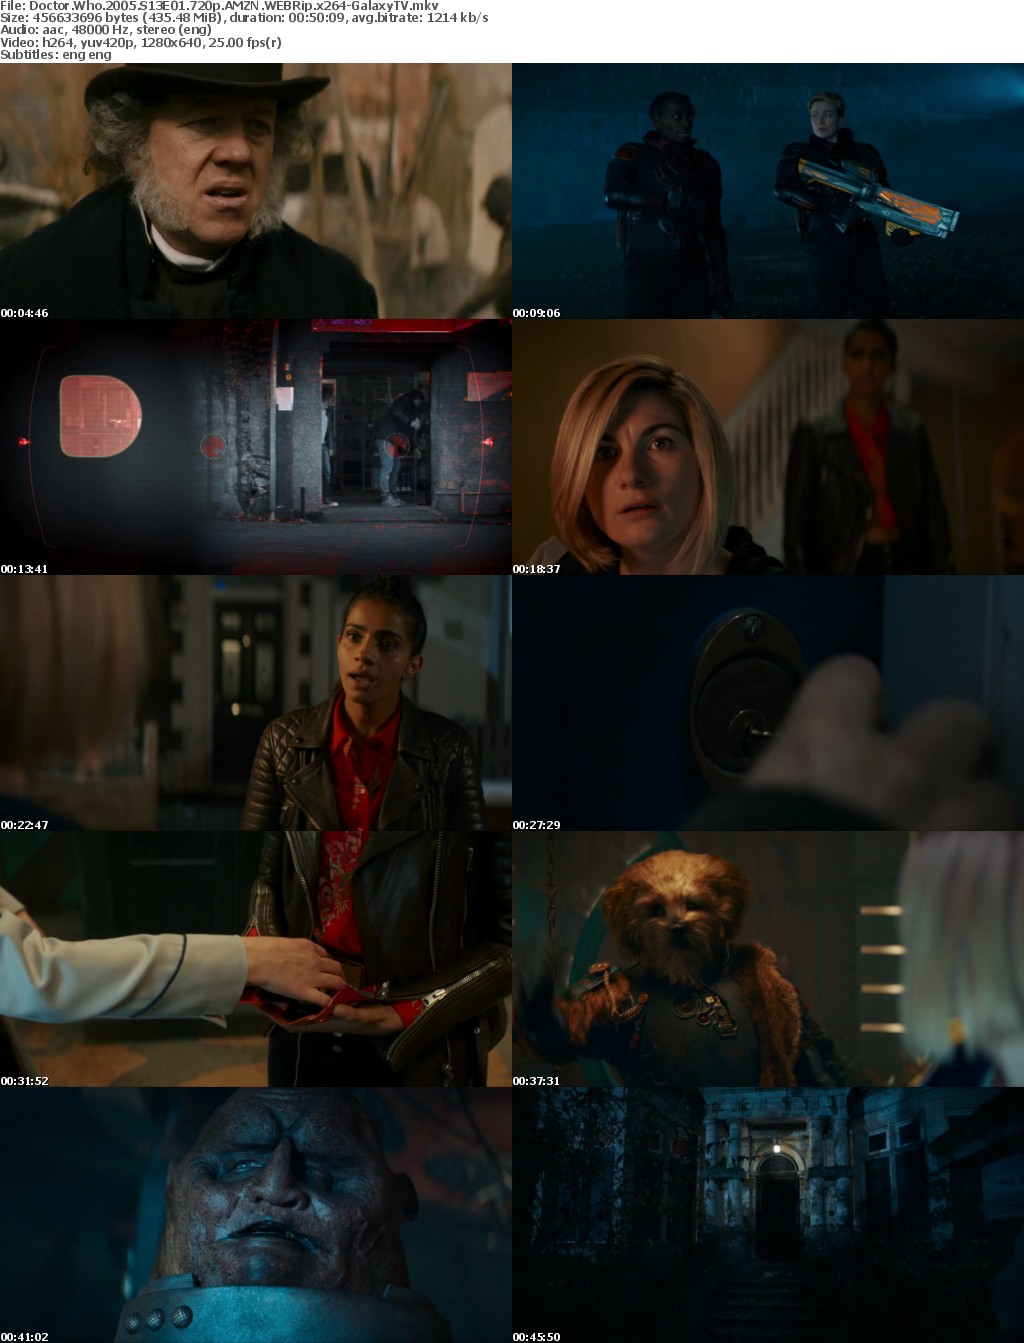 Doctor Who 2005 S13 COMPLETE 720p AMZN WEBRip x264-GalaxyTV